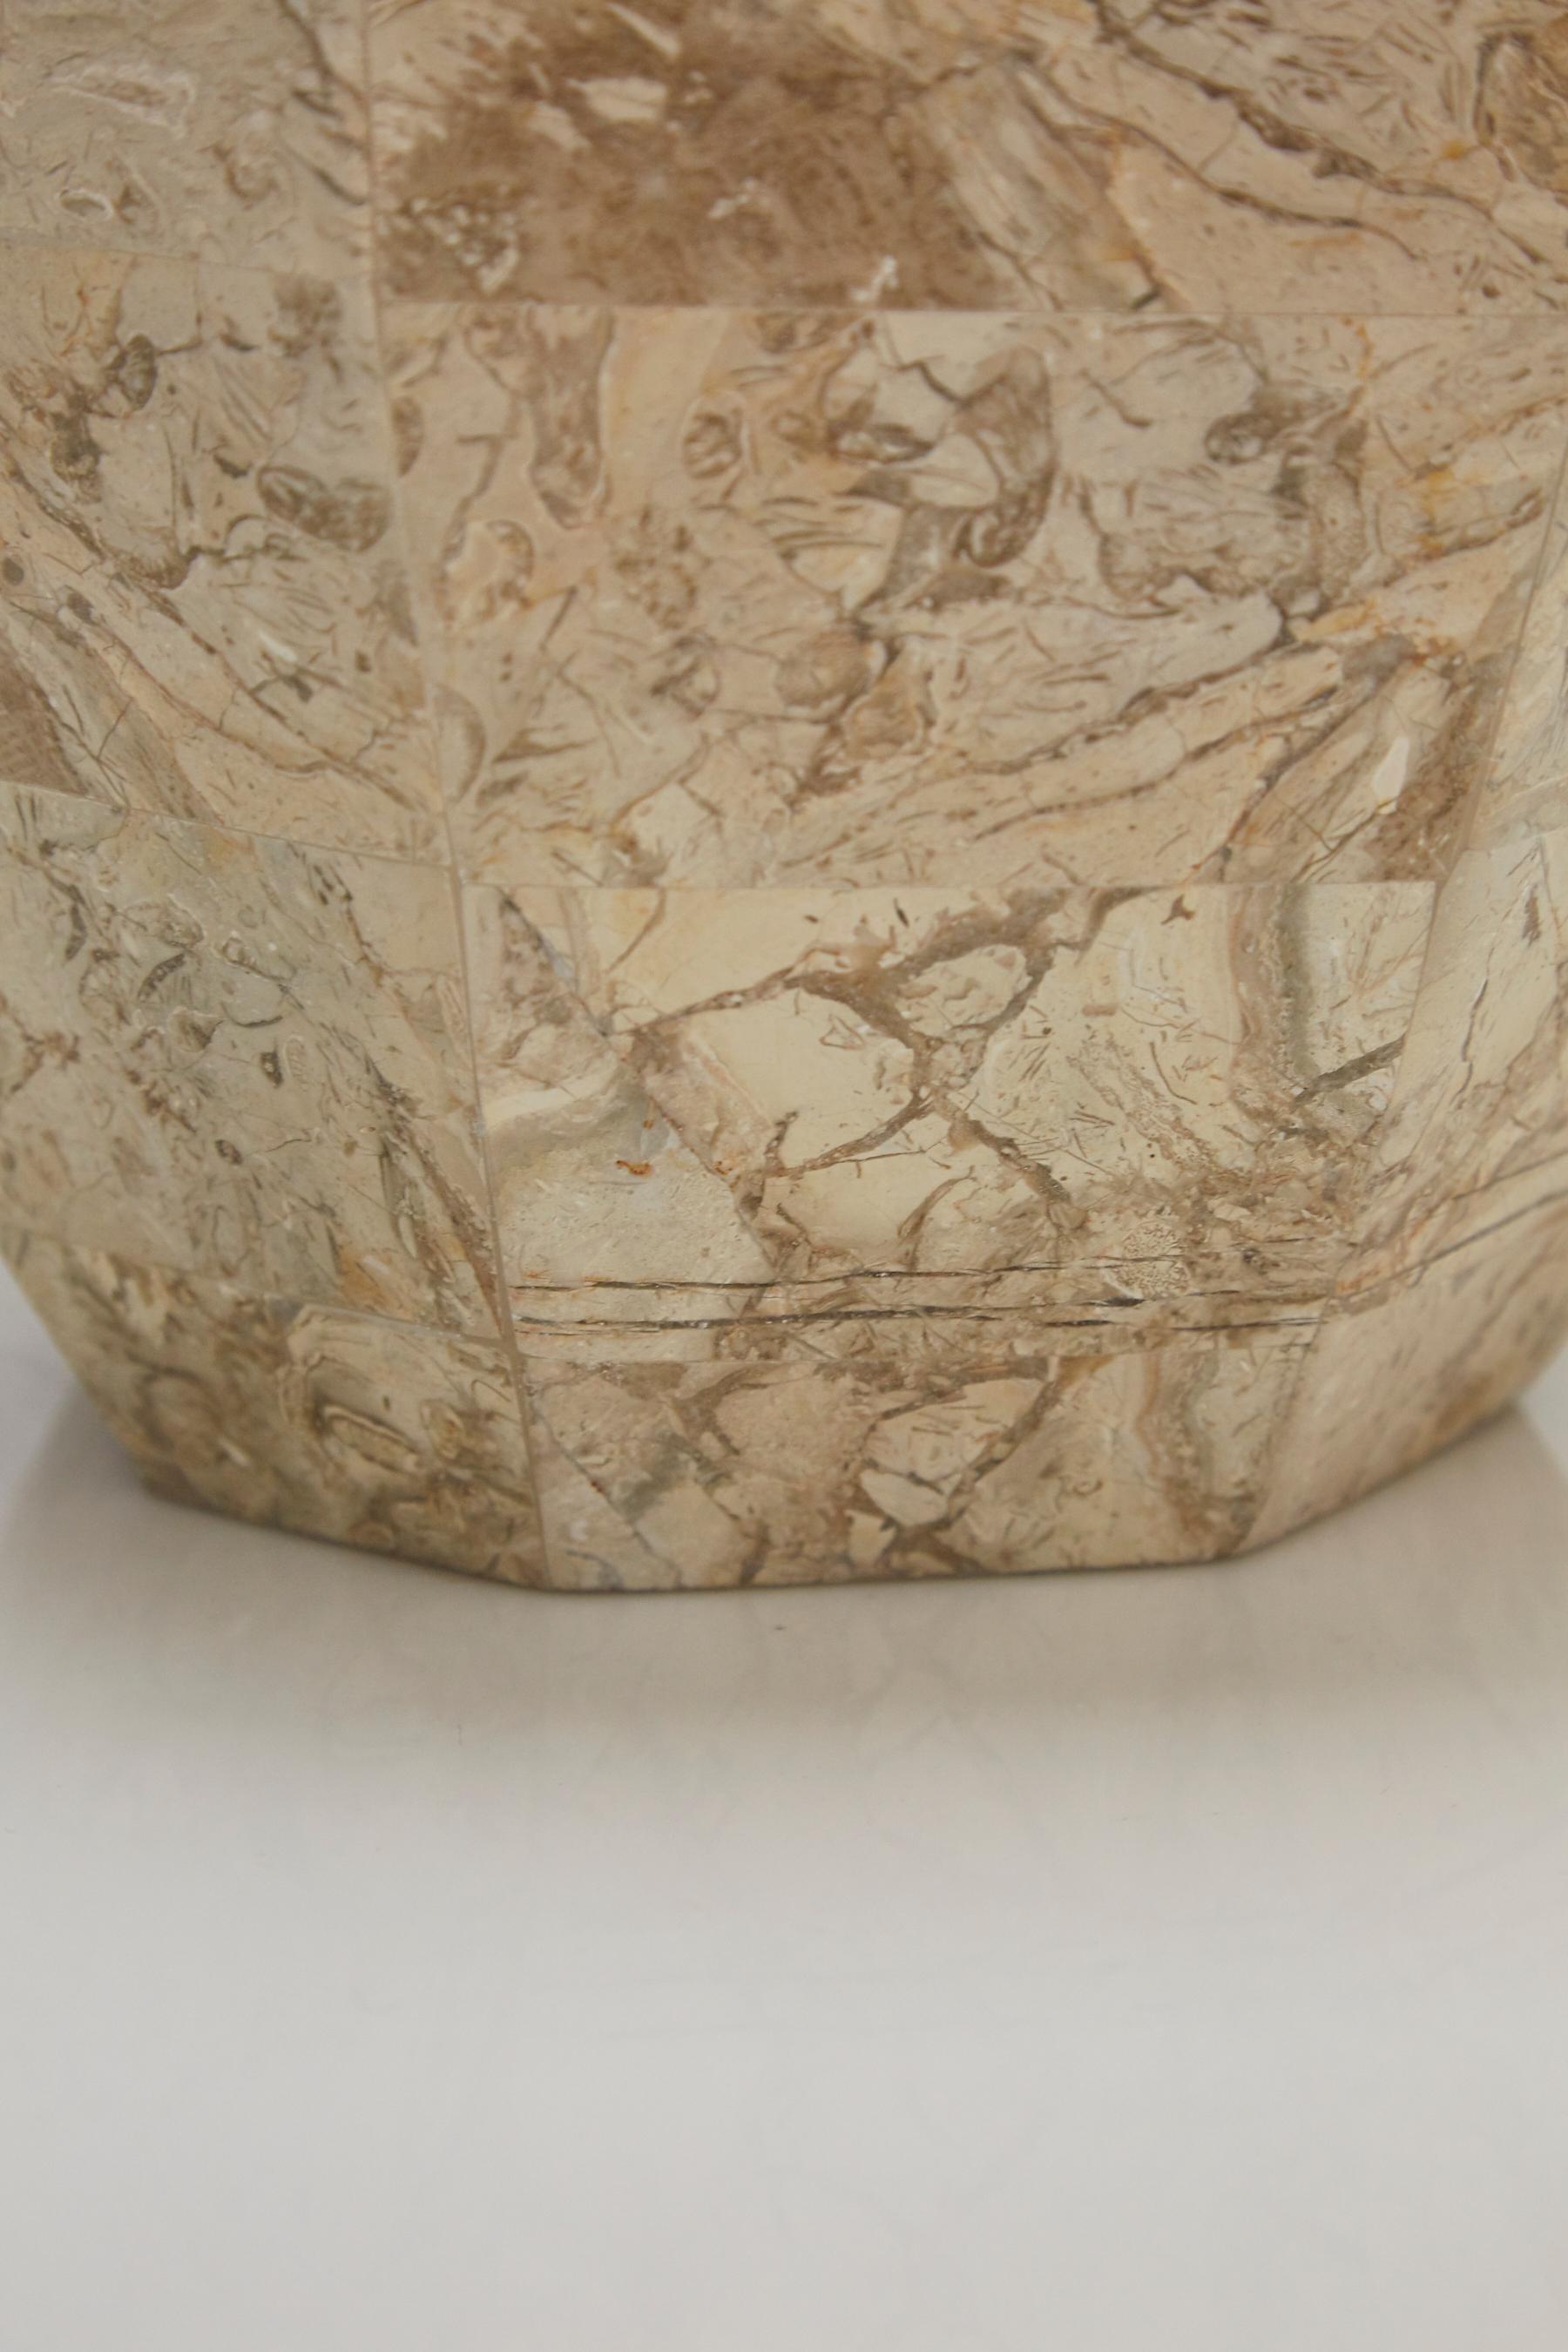 Short Octagonal Vase in Tessellated Cantor Stone, 1990s For Sale 5